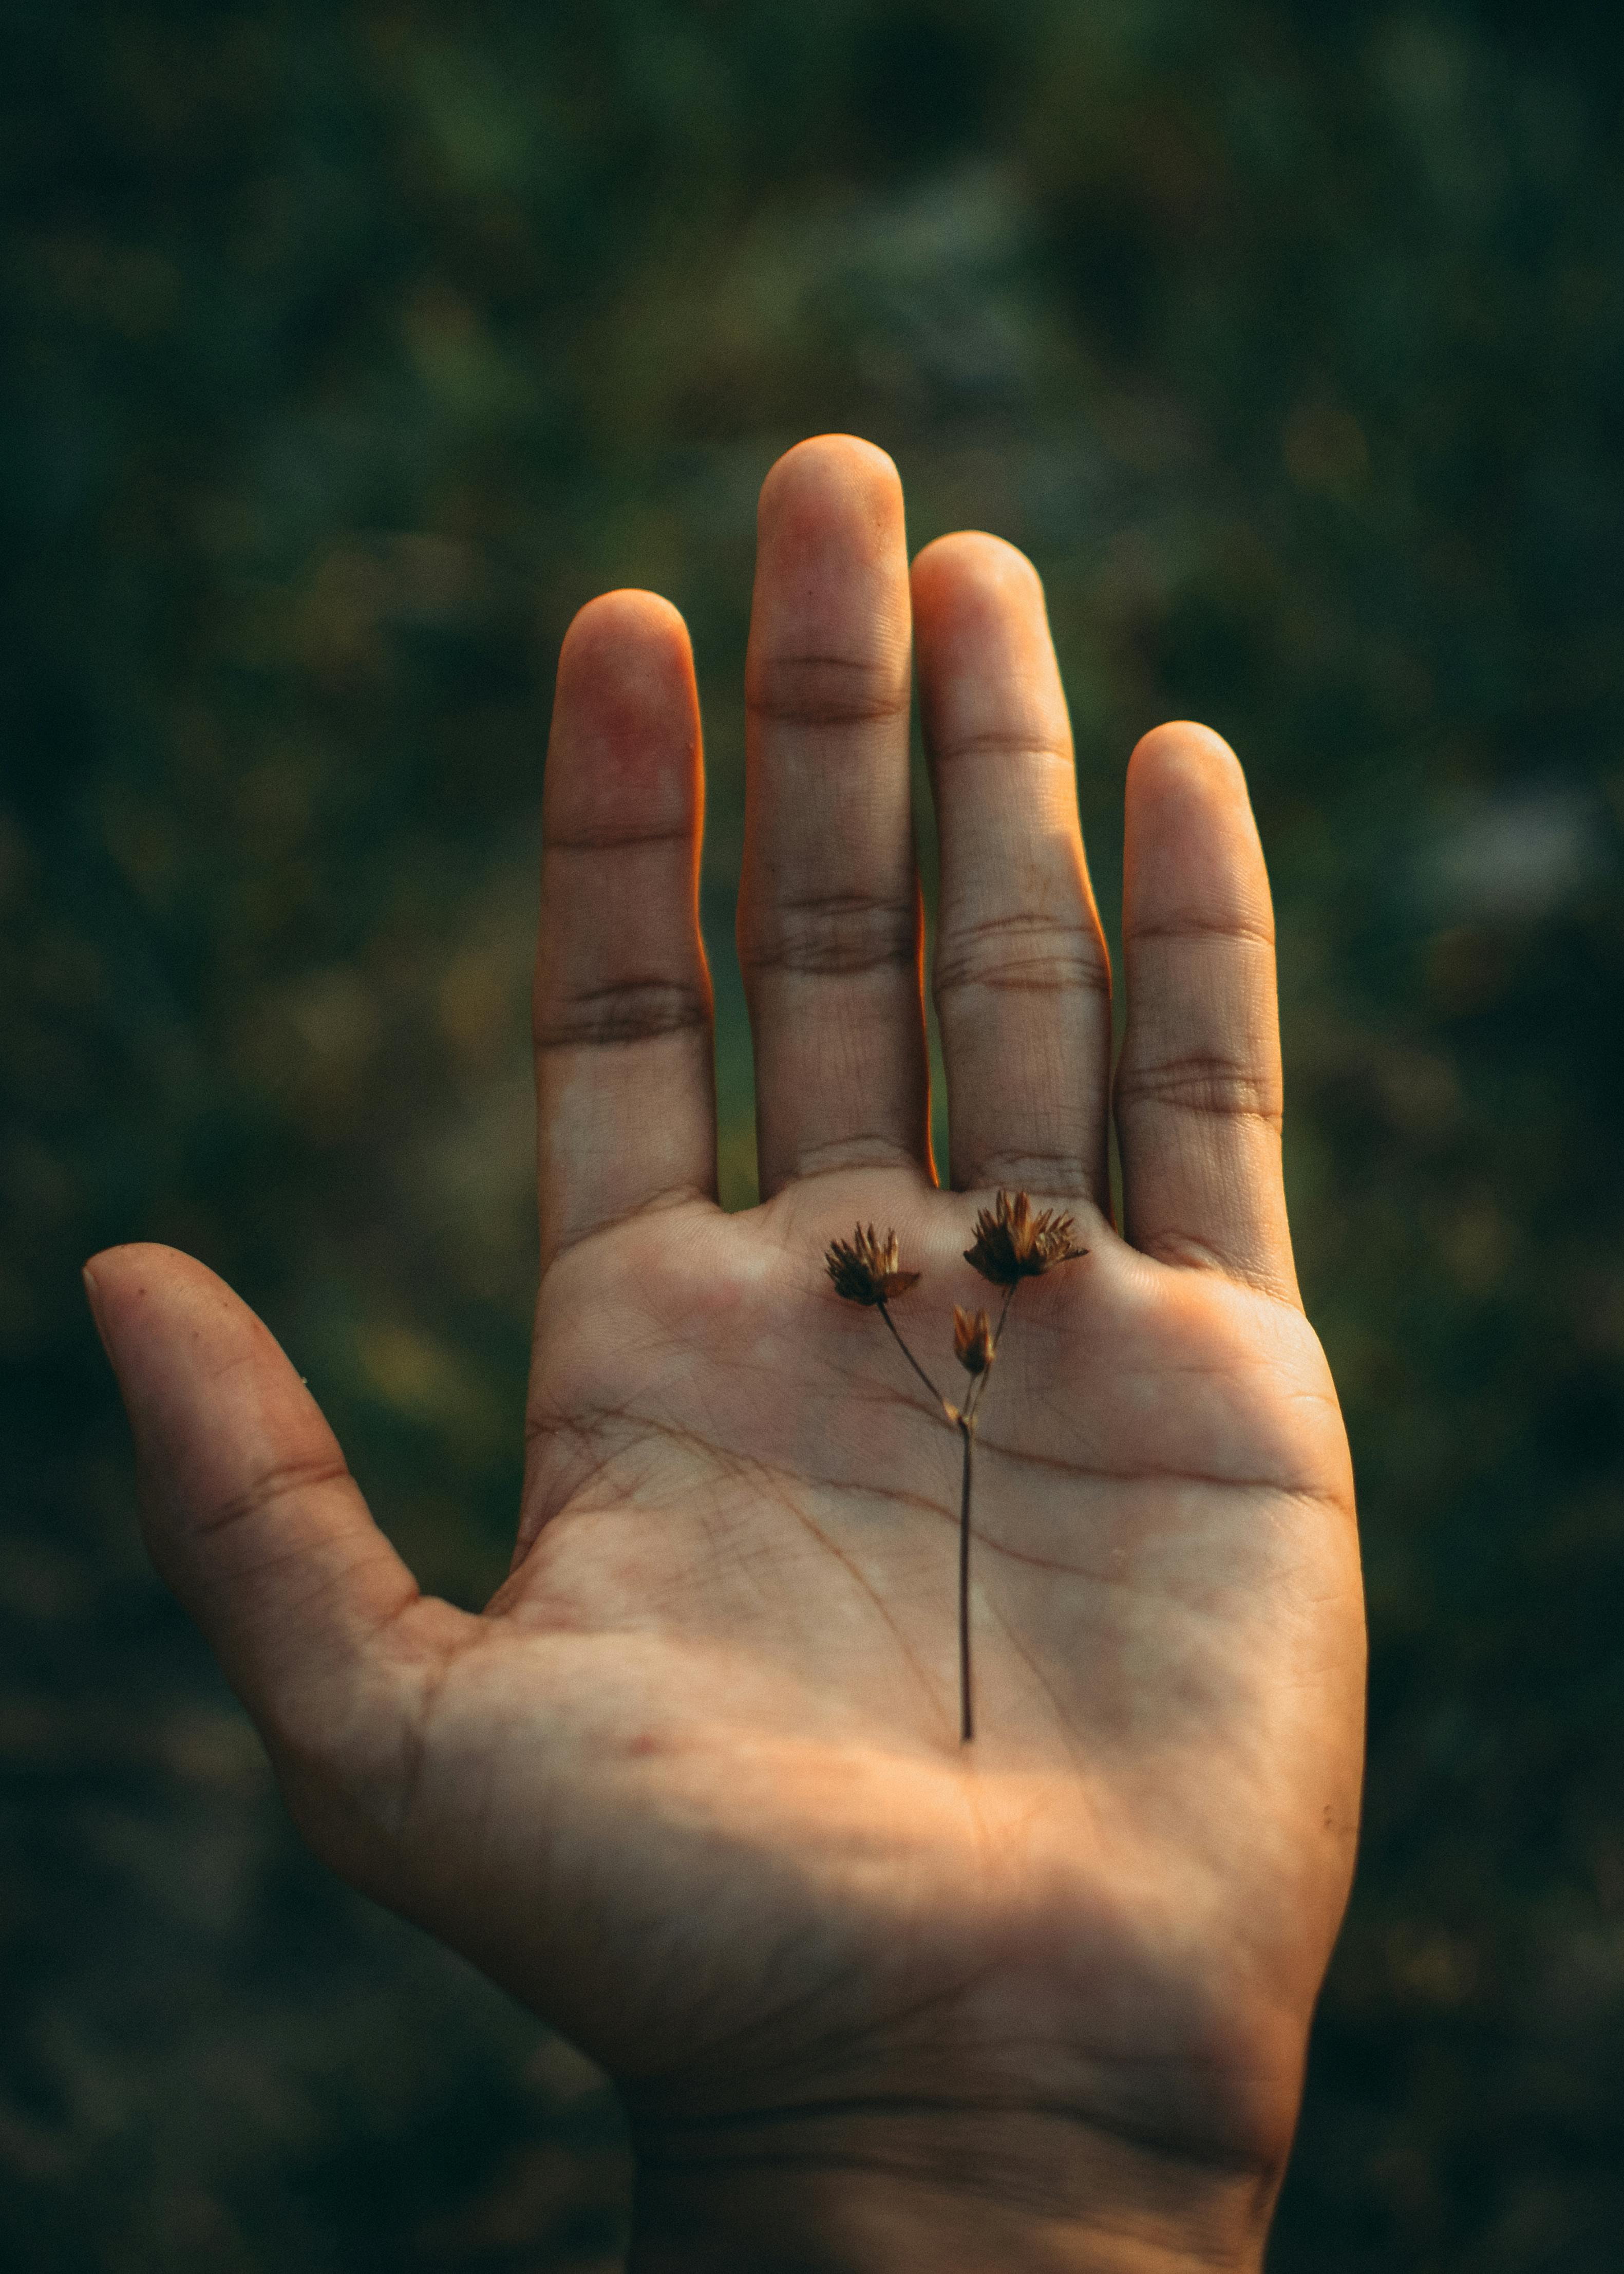 Person's Hands · Free Stock Photo - 3162 x 4427 jpeg 2110kB